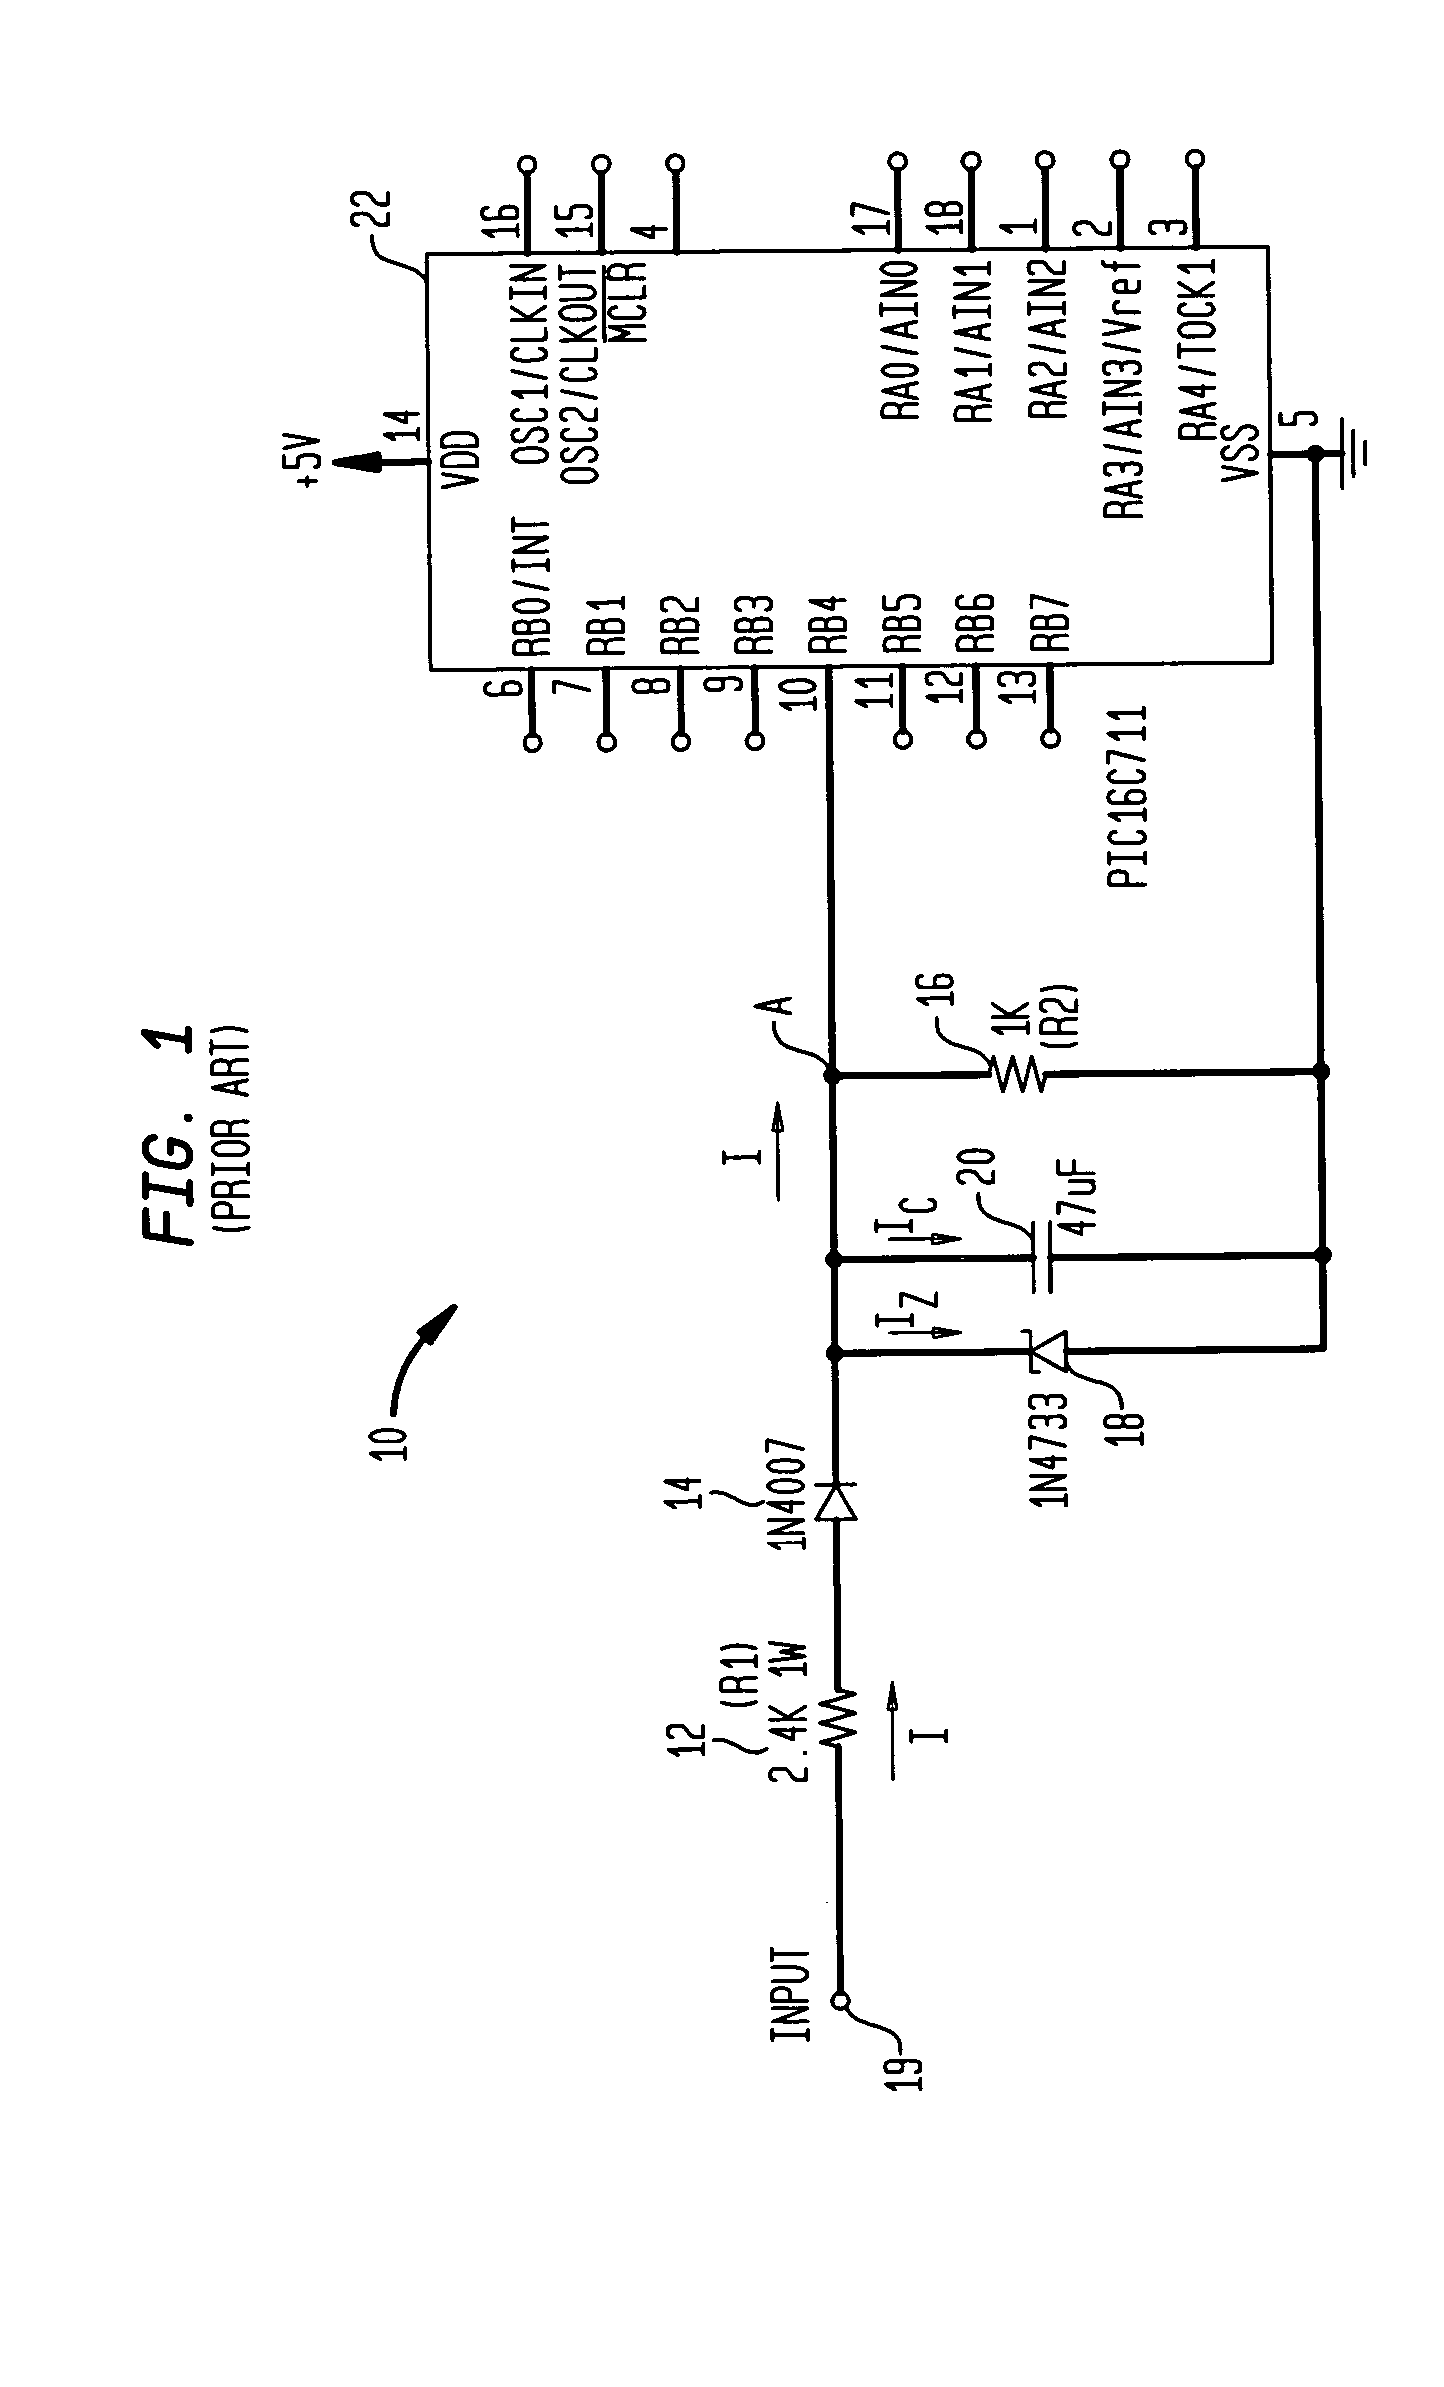 Apparatus and method for detecting, filtering and conditioning AC voltage signals